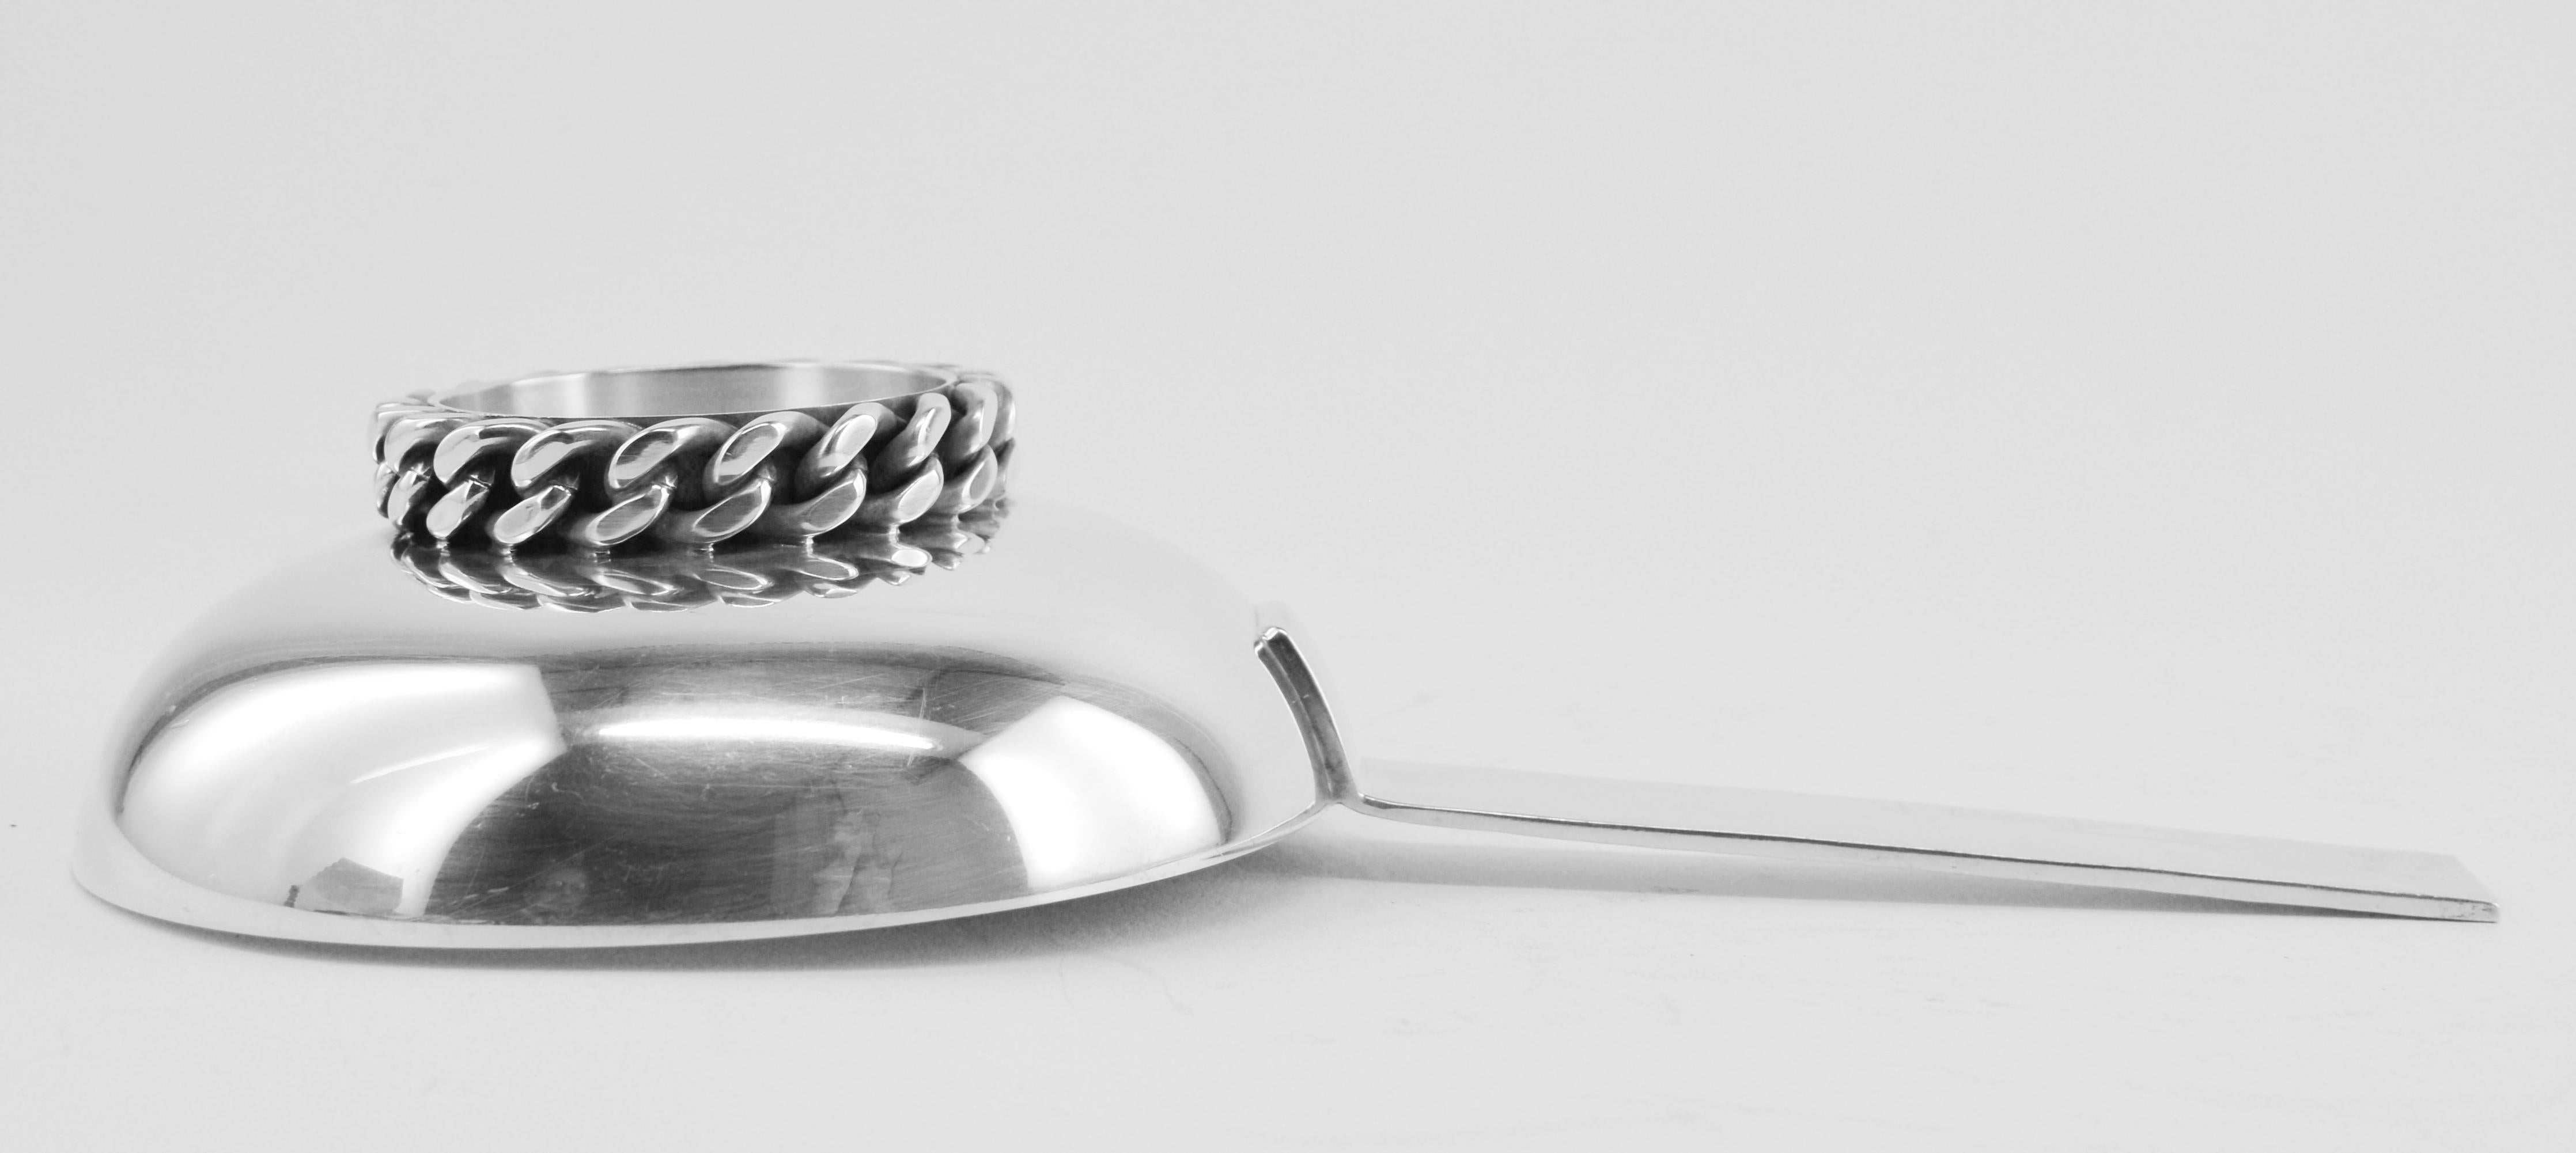 Decorative pan for aperitif by Jean Despres, France, circa 1950. Silver-plated metal piece with a hammered handle, and decorated at the base of a flat link chain. The plating is original. Dimensions : H 1.93 in. x W 8.15 in. x D 4.3 in. - H 4.9 cm x